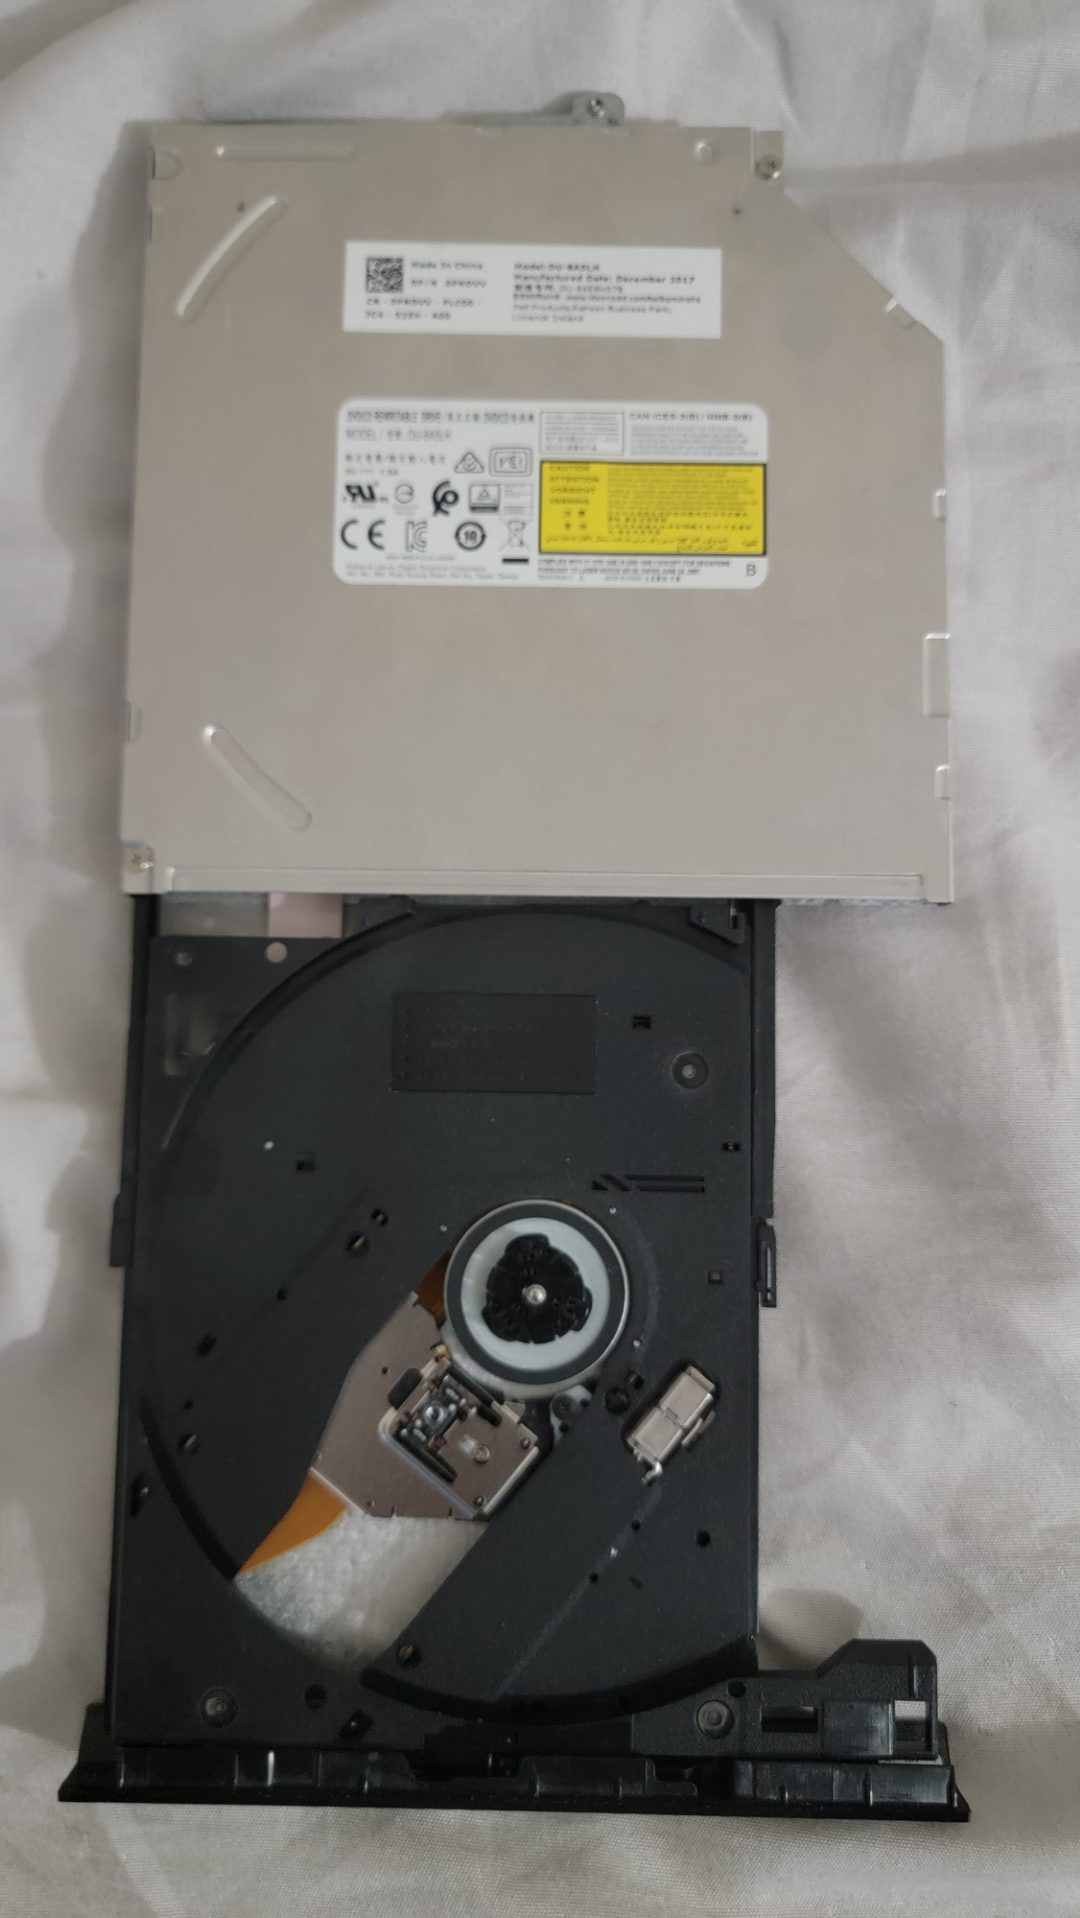 The LiteOn (PLDS) DU-8A5LH Optical Drive with tray opened.